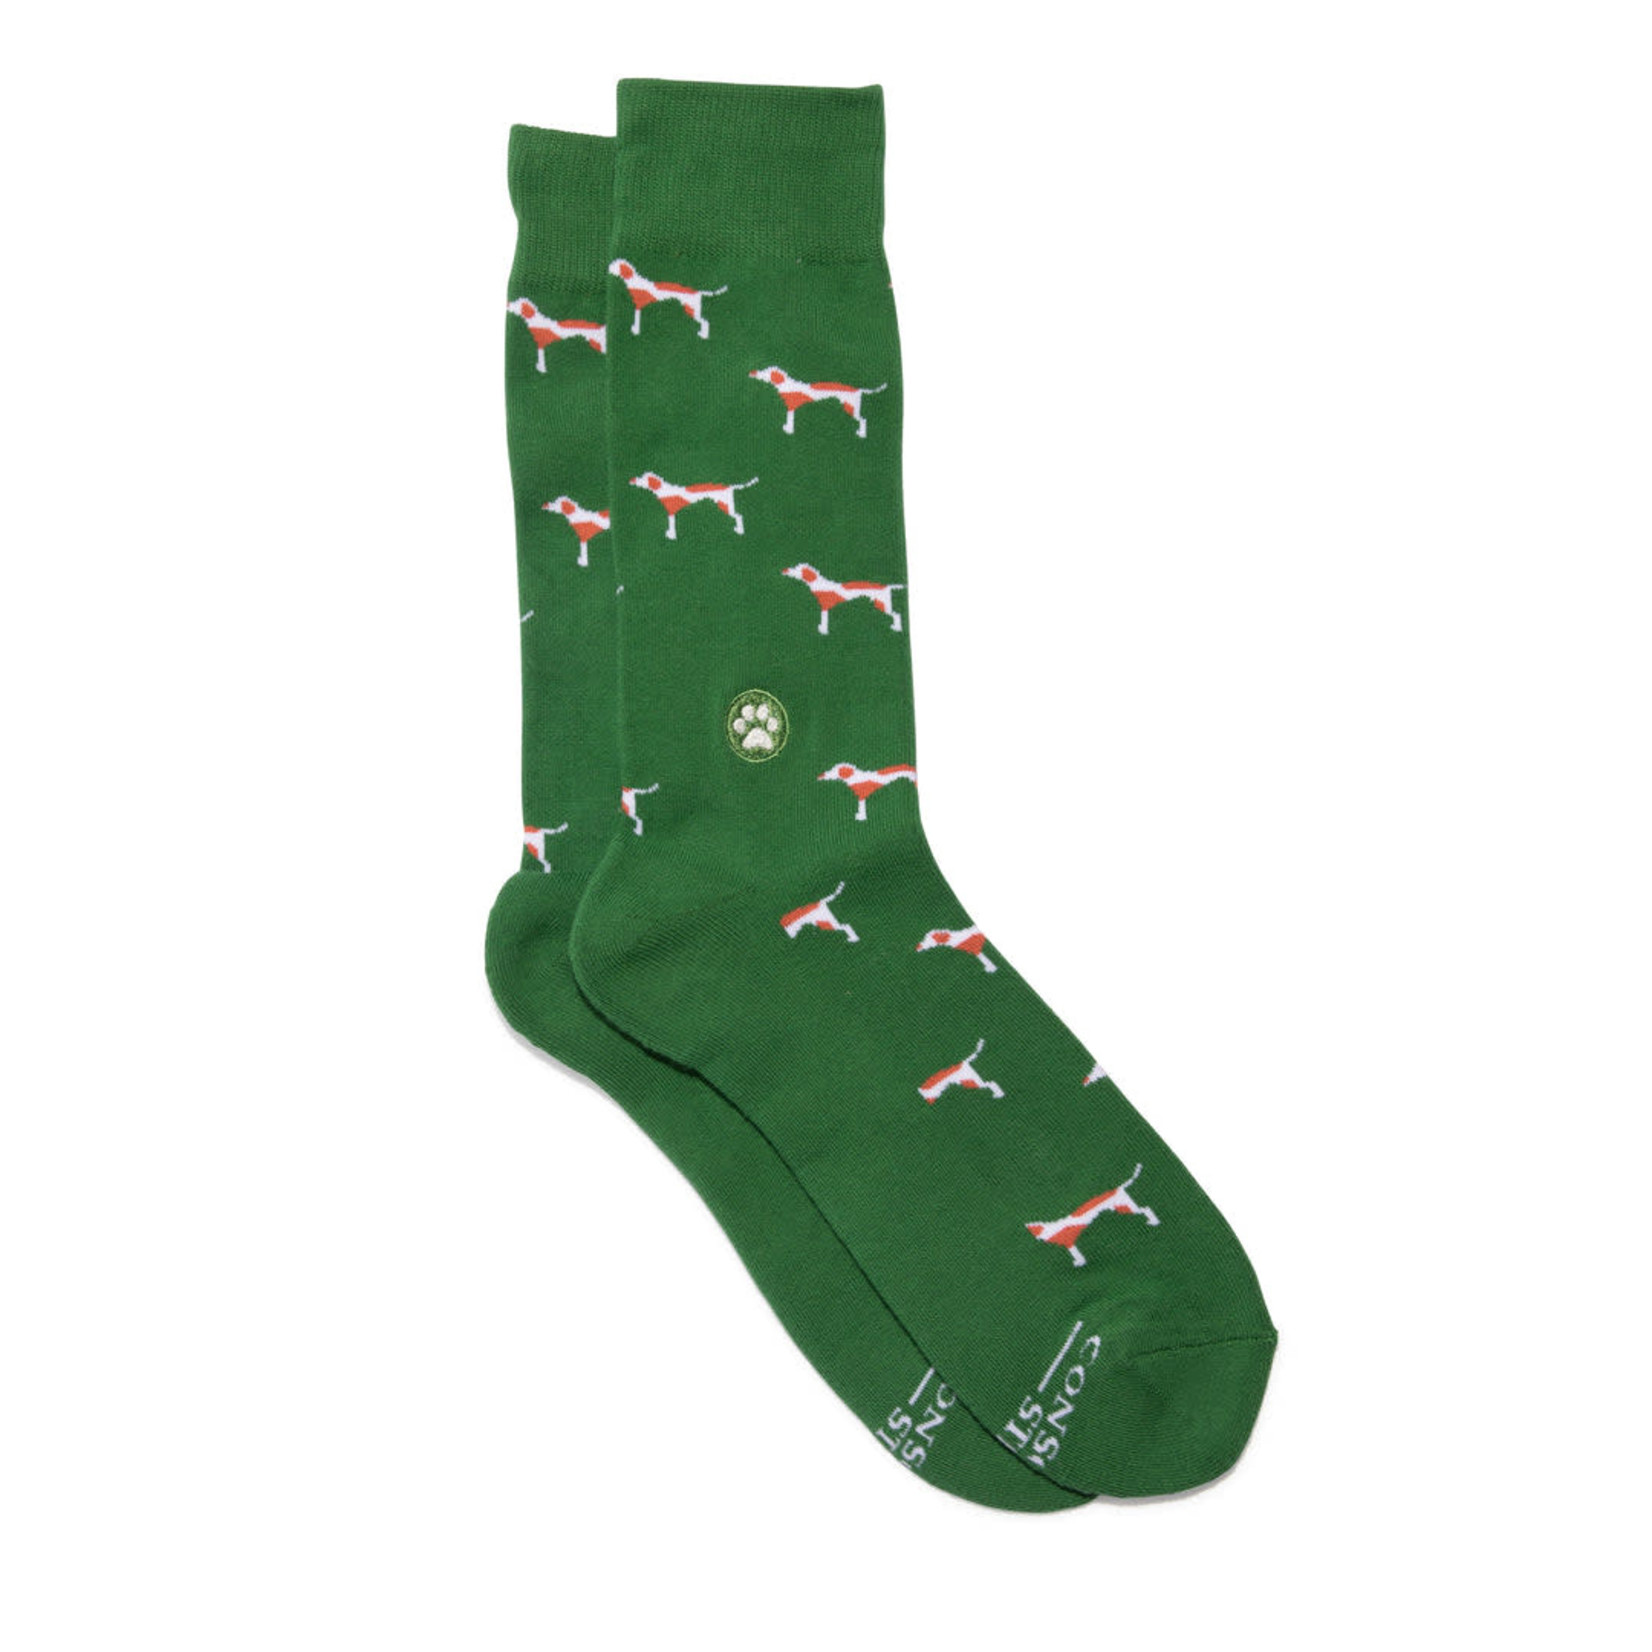 Conscious Step Conscious Step Socks That Save Dogs, Green, Small